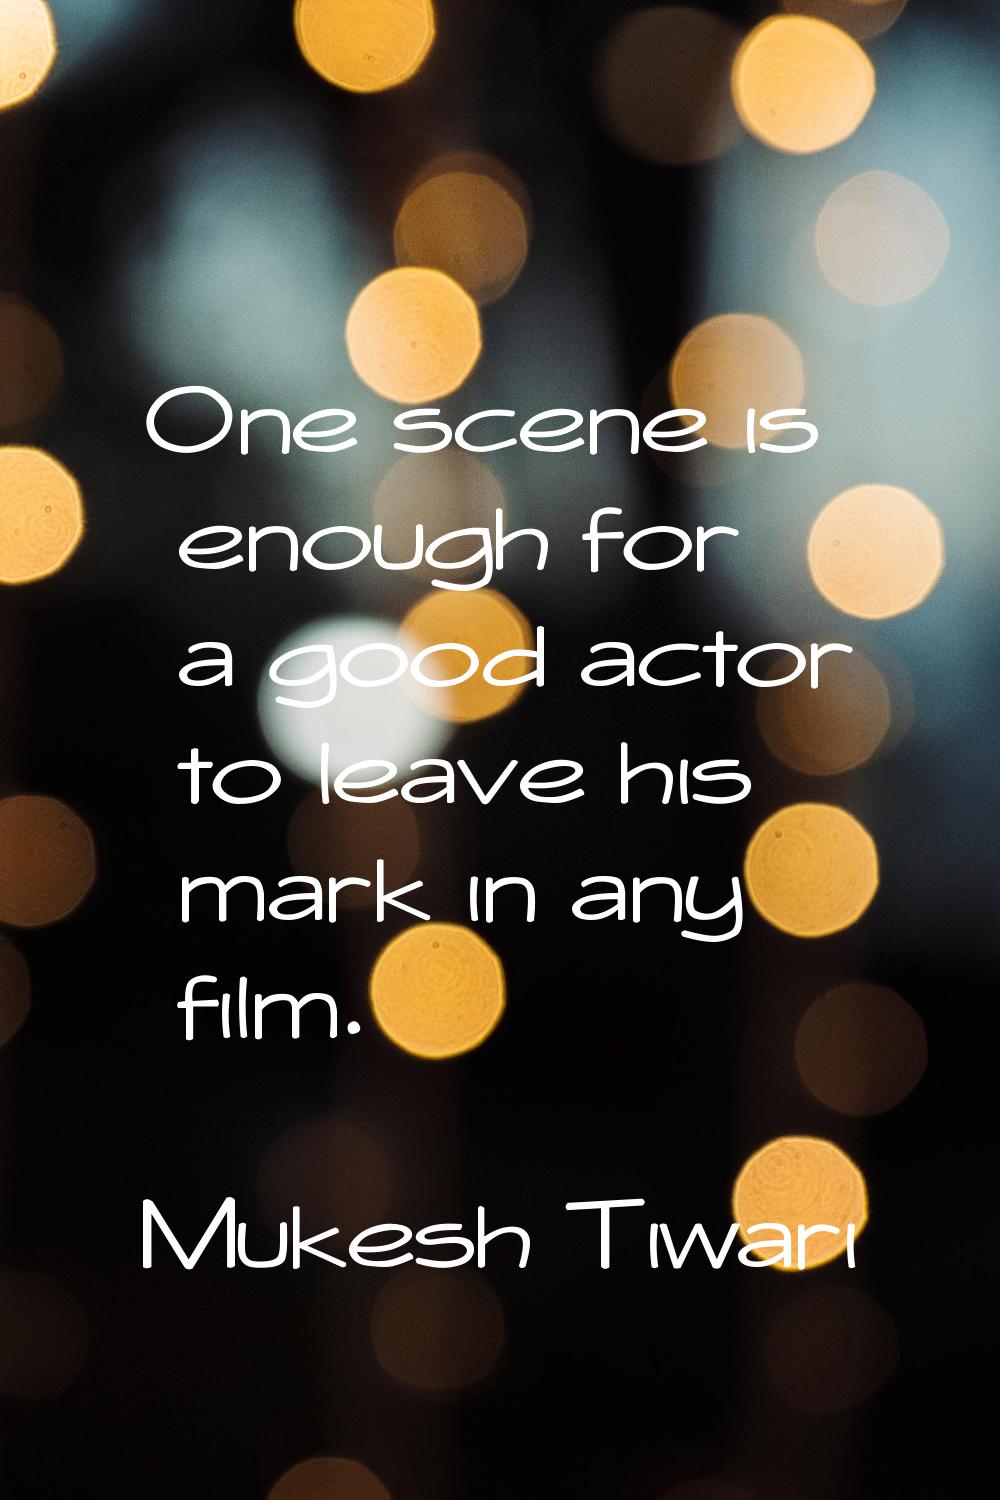 One scene is enough for a good actor to leave his mark in any film.